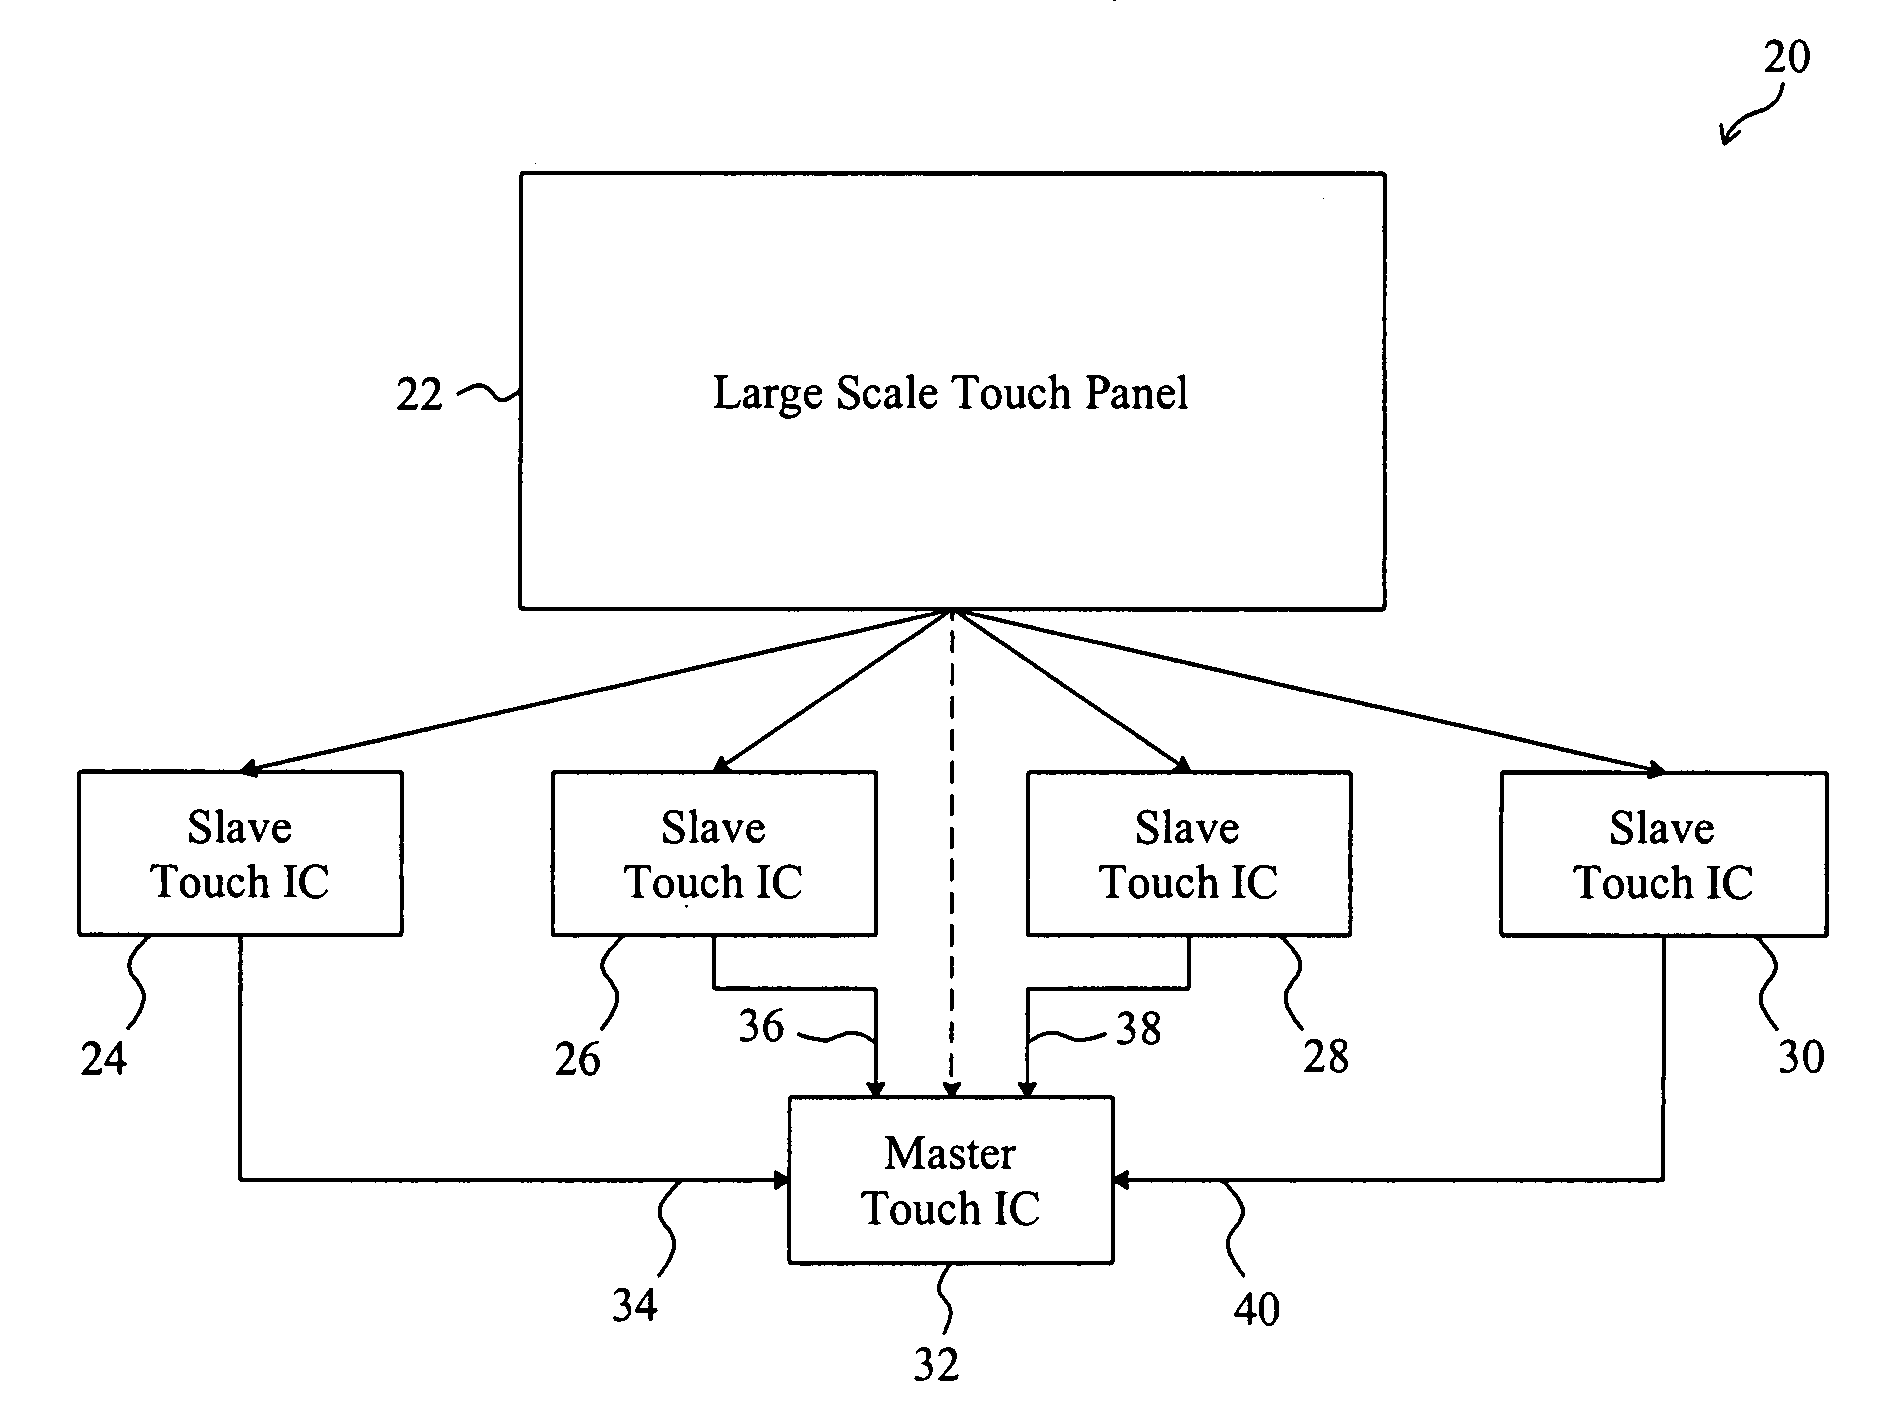 Circuit complexity reduction of a capacitive touch system